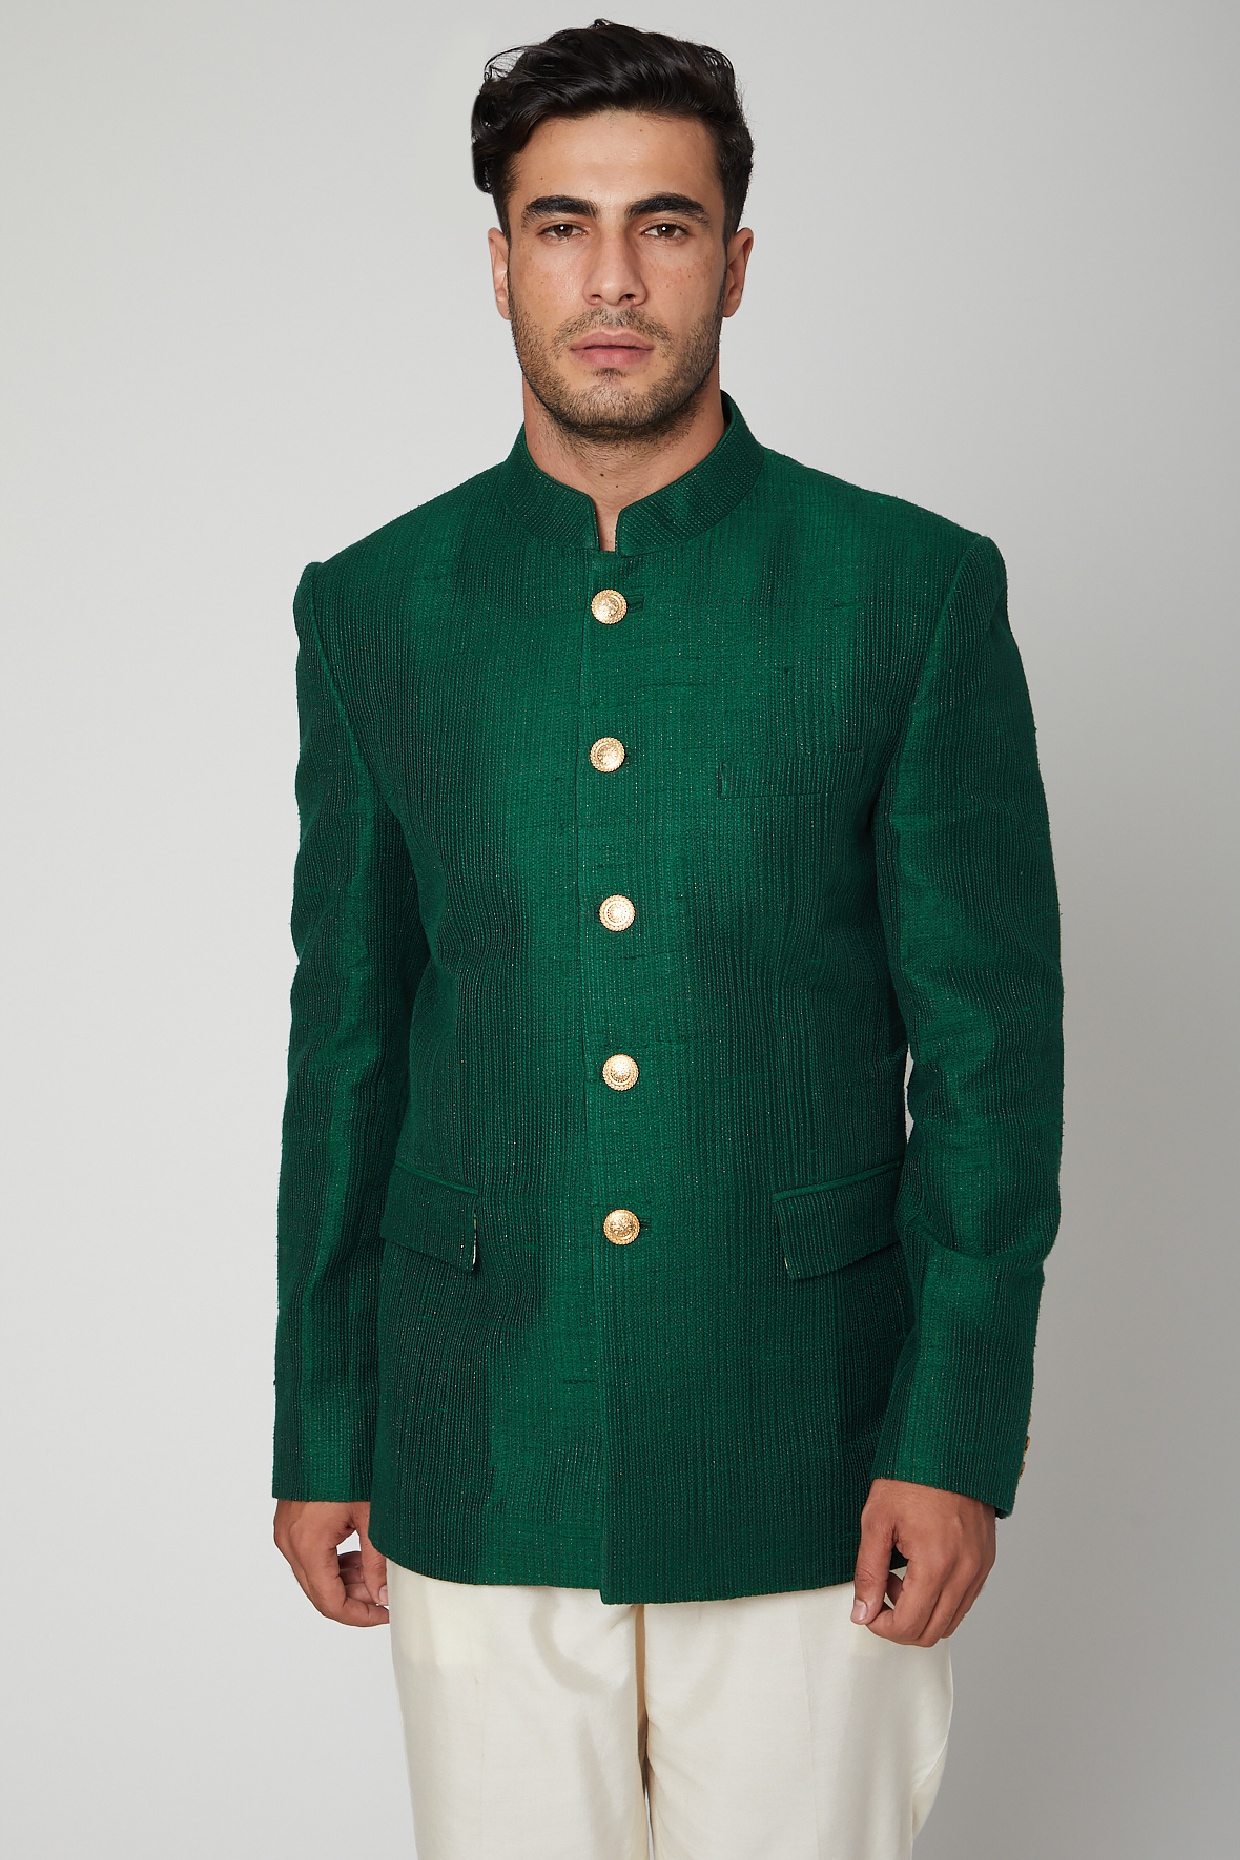 Solid Color Satin Cotton Suit in Bottle Green (34) - Ucchal Fashion